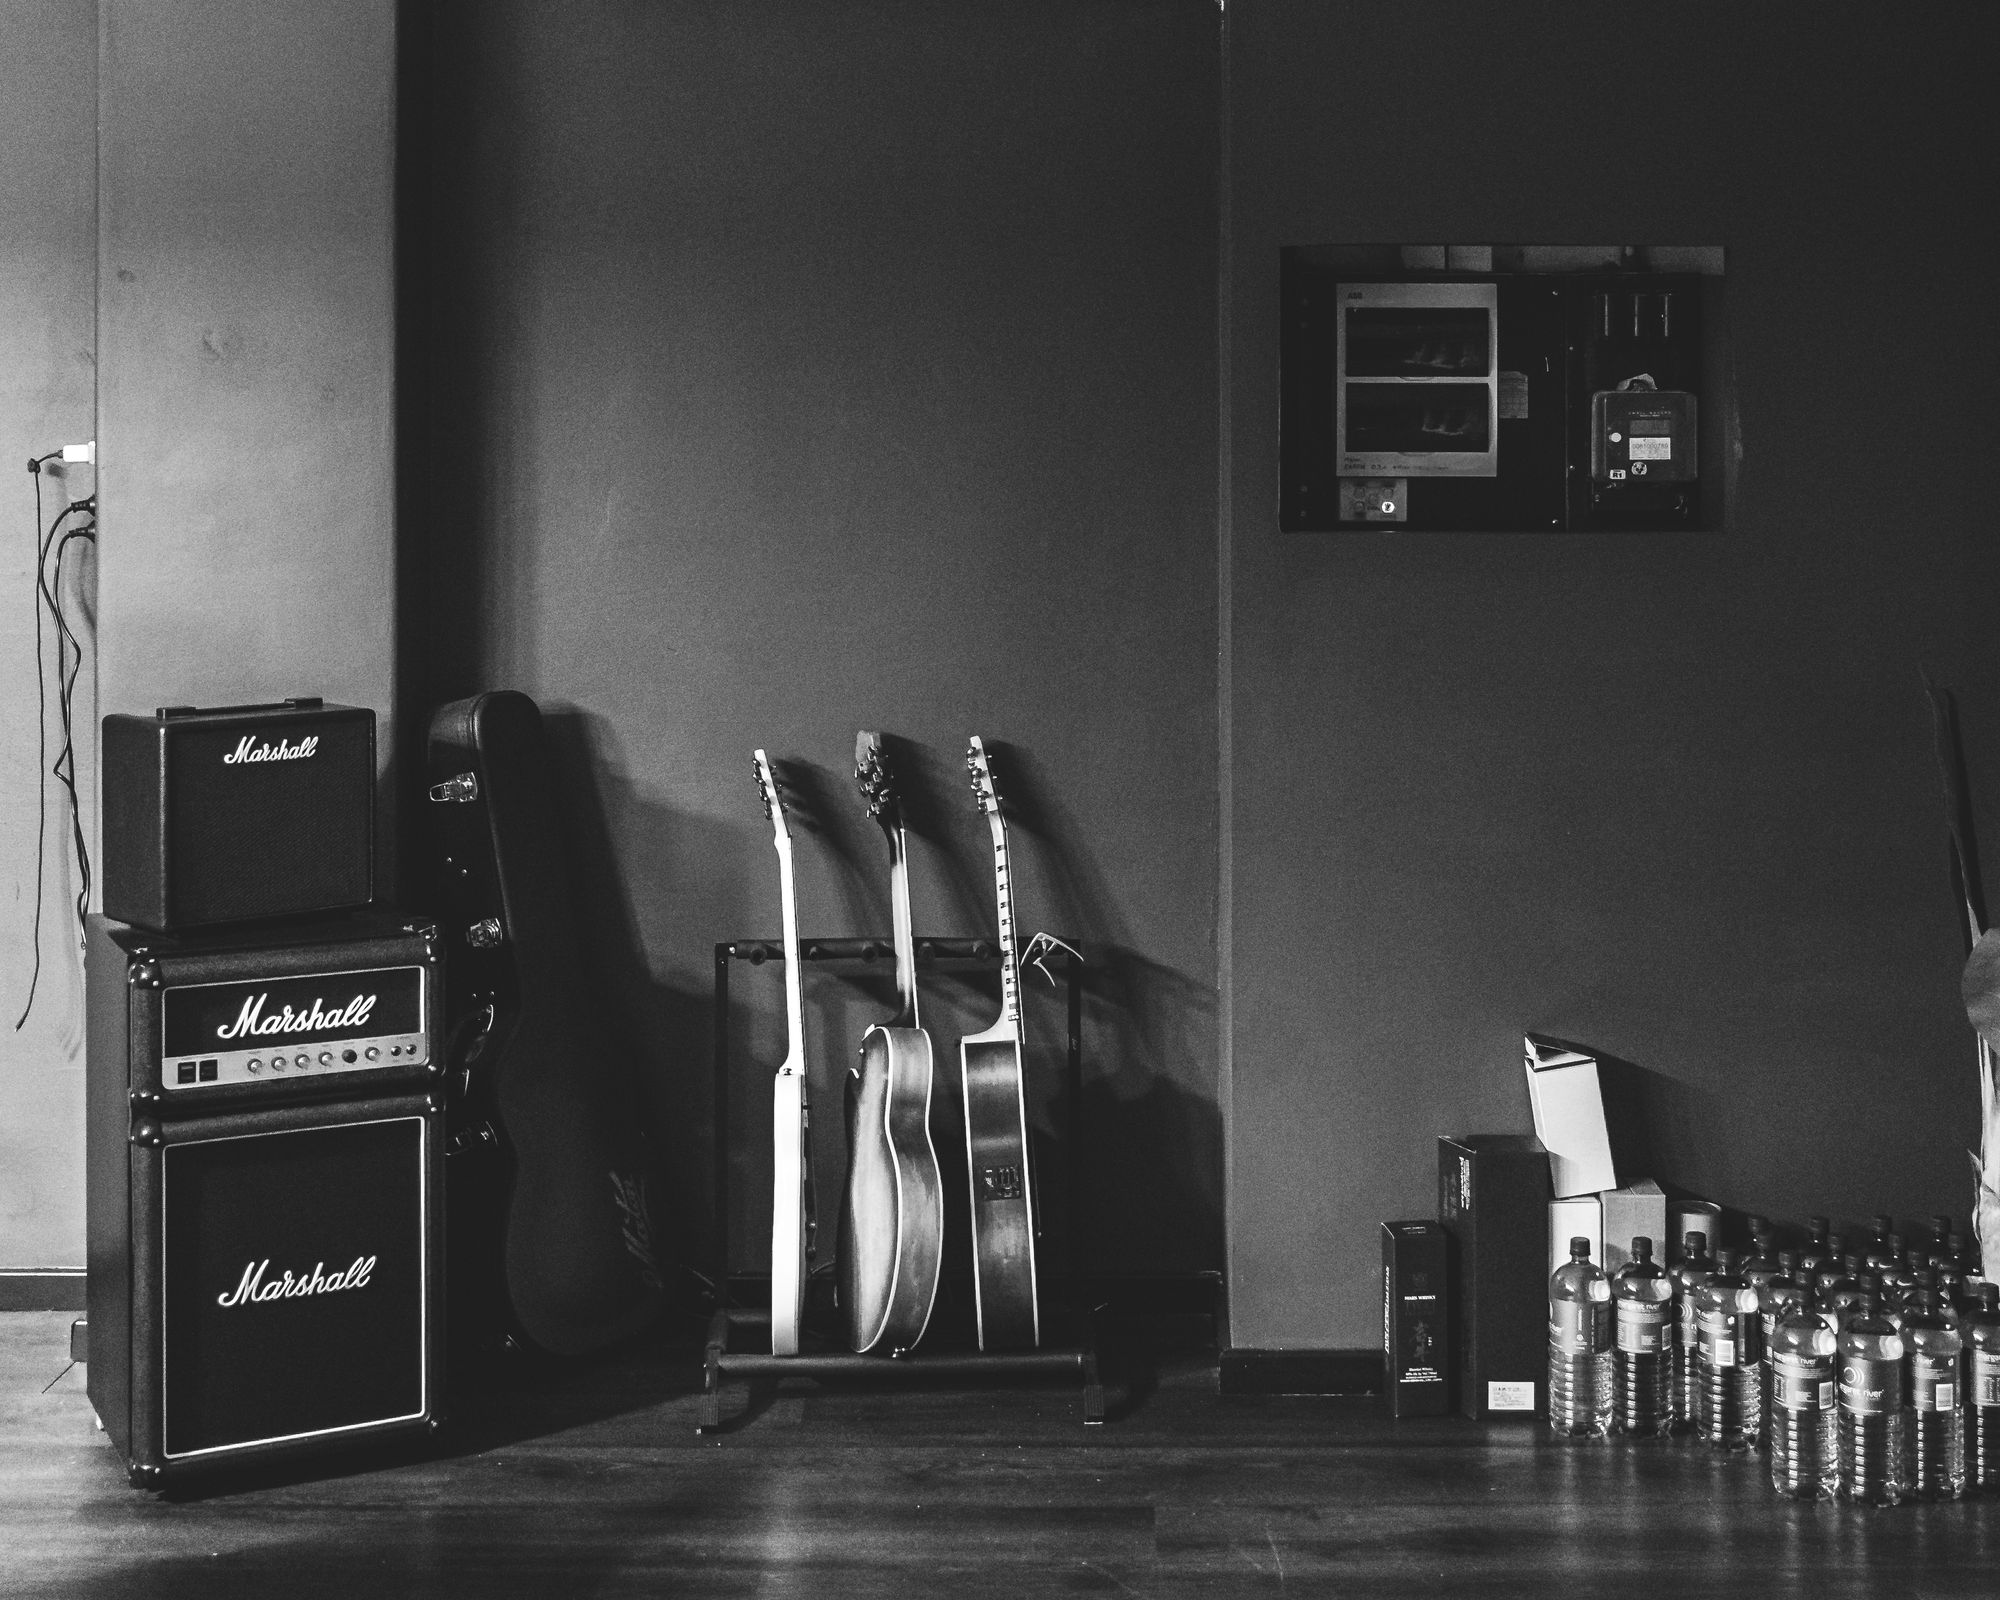 Black and white photo of a wall with Marshall guitar amps, guitars and water bottles lined up against wall